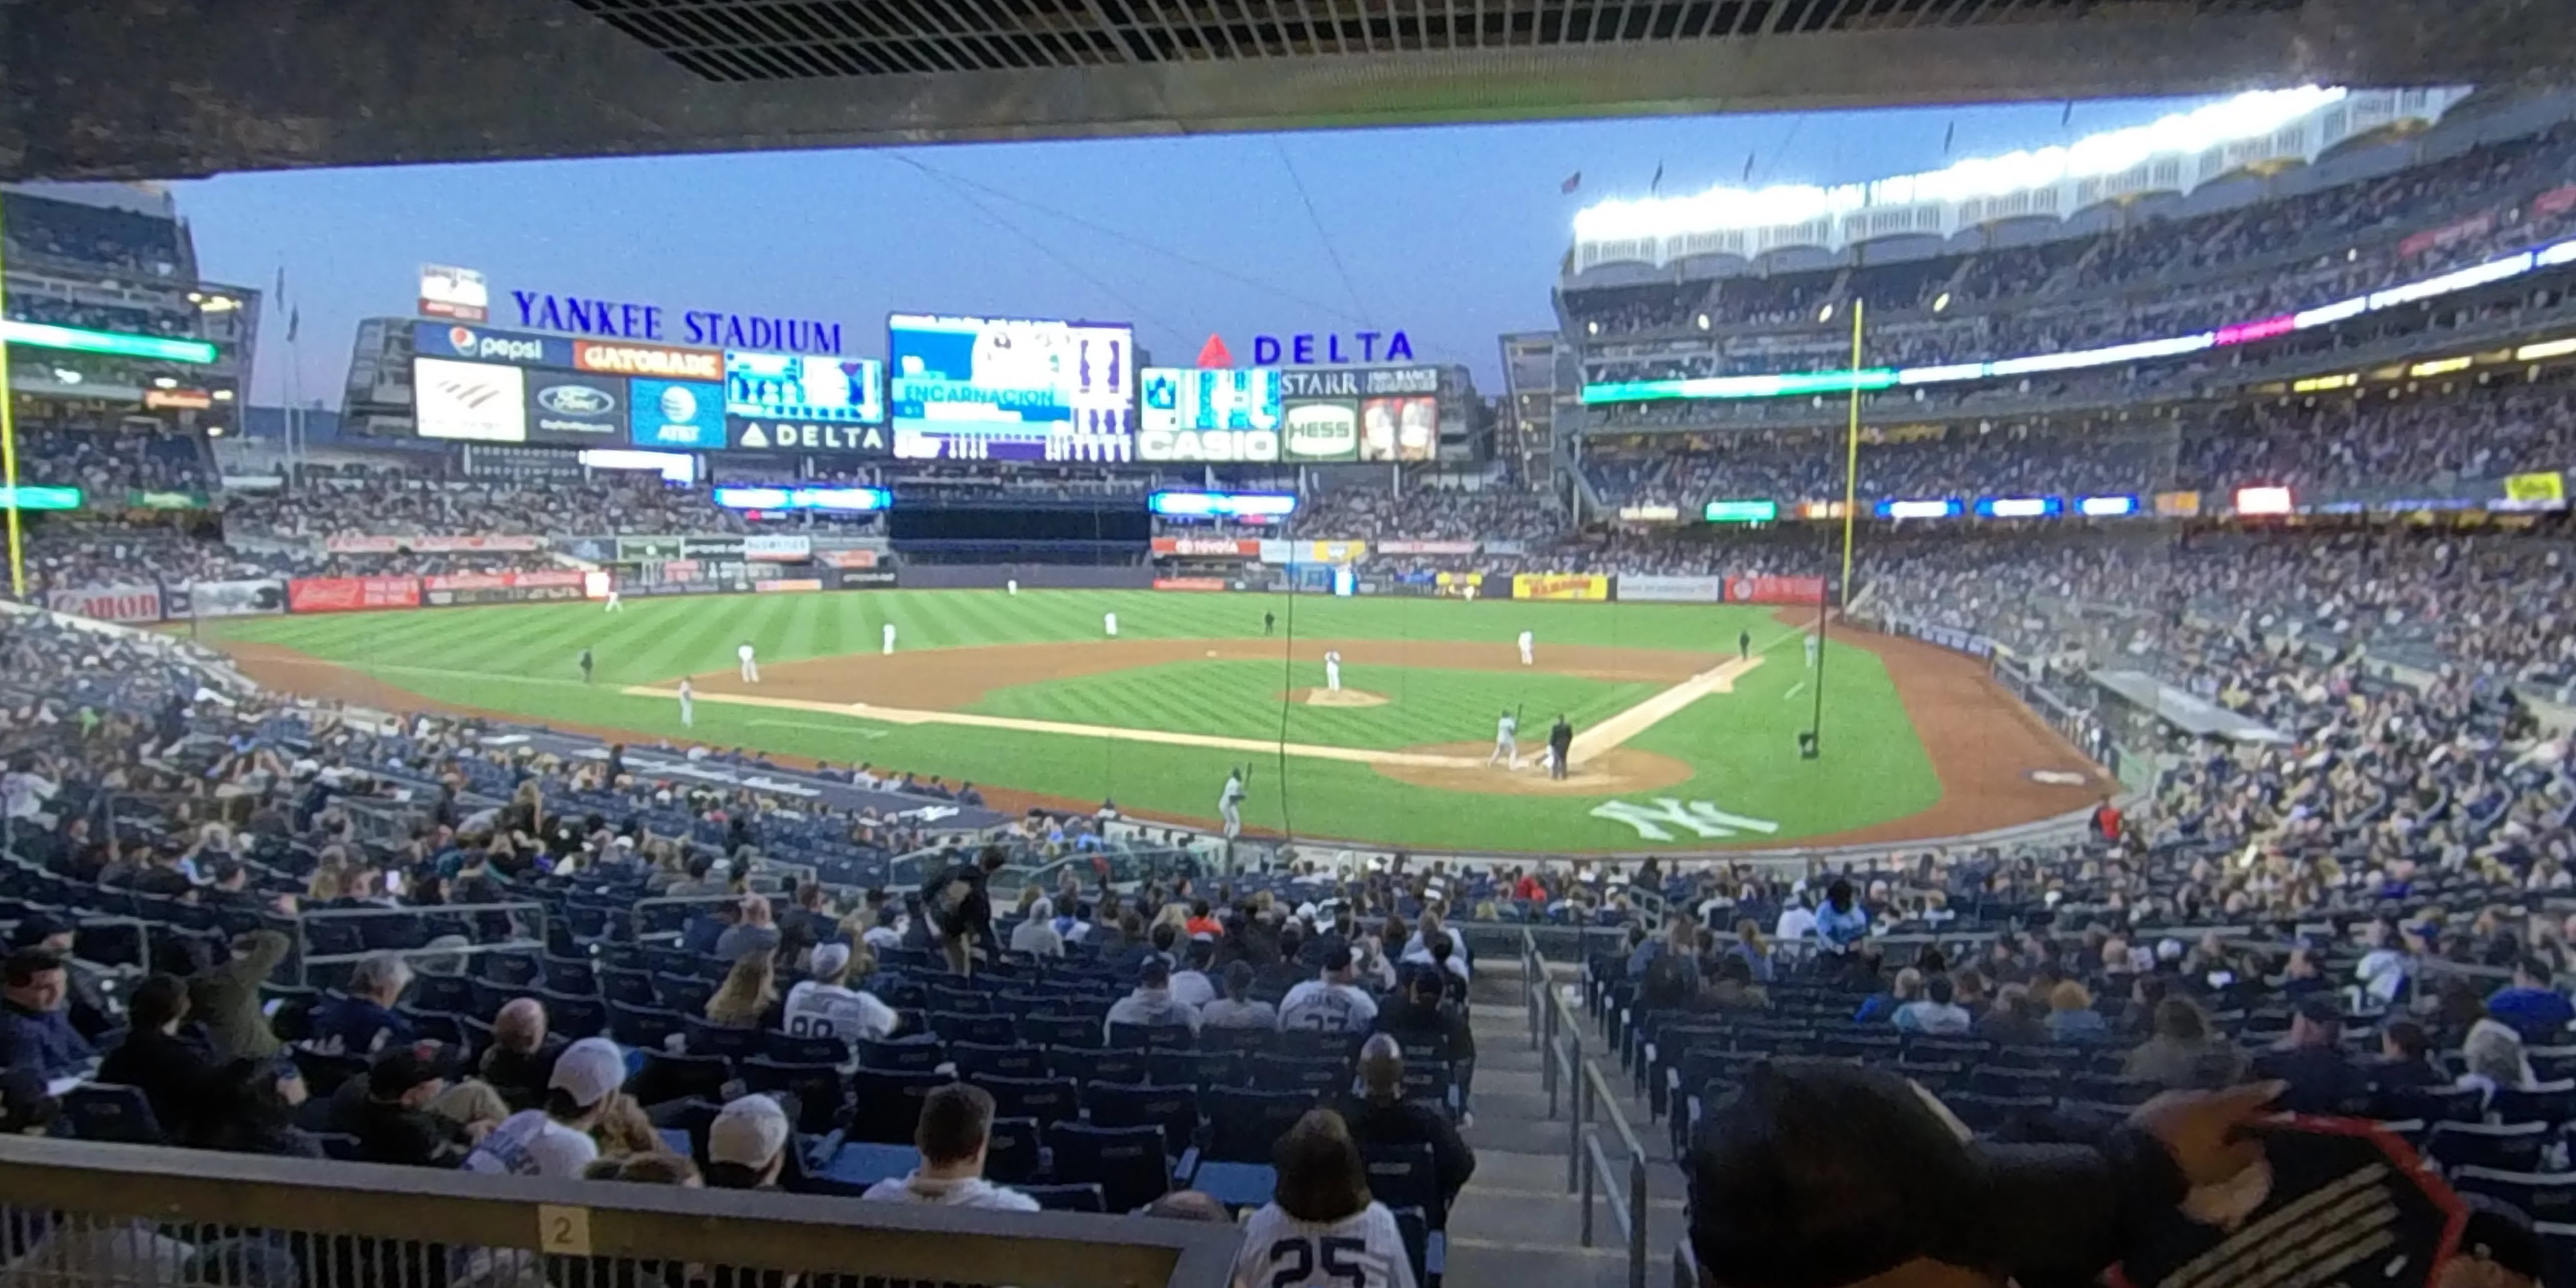 section 121a panoramic seat view  for baseball - yankee stadium